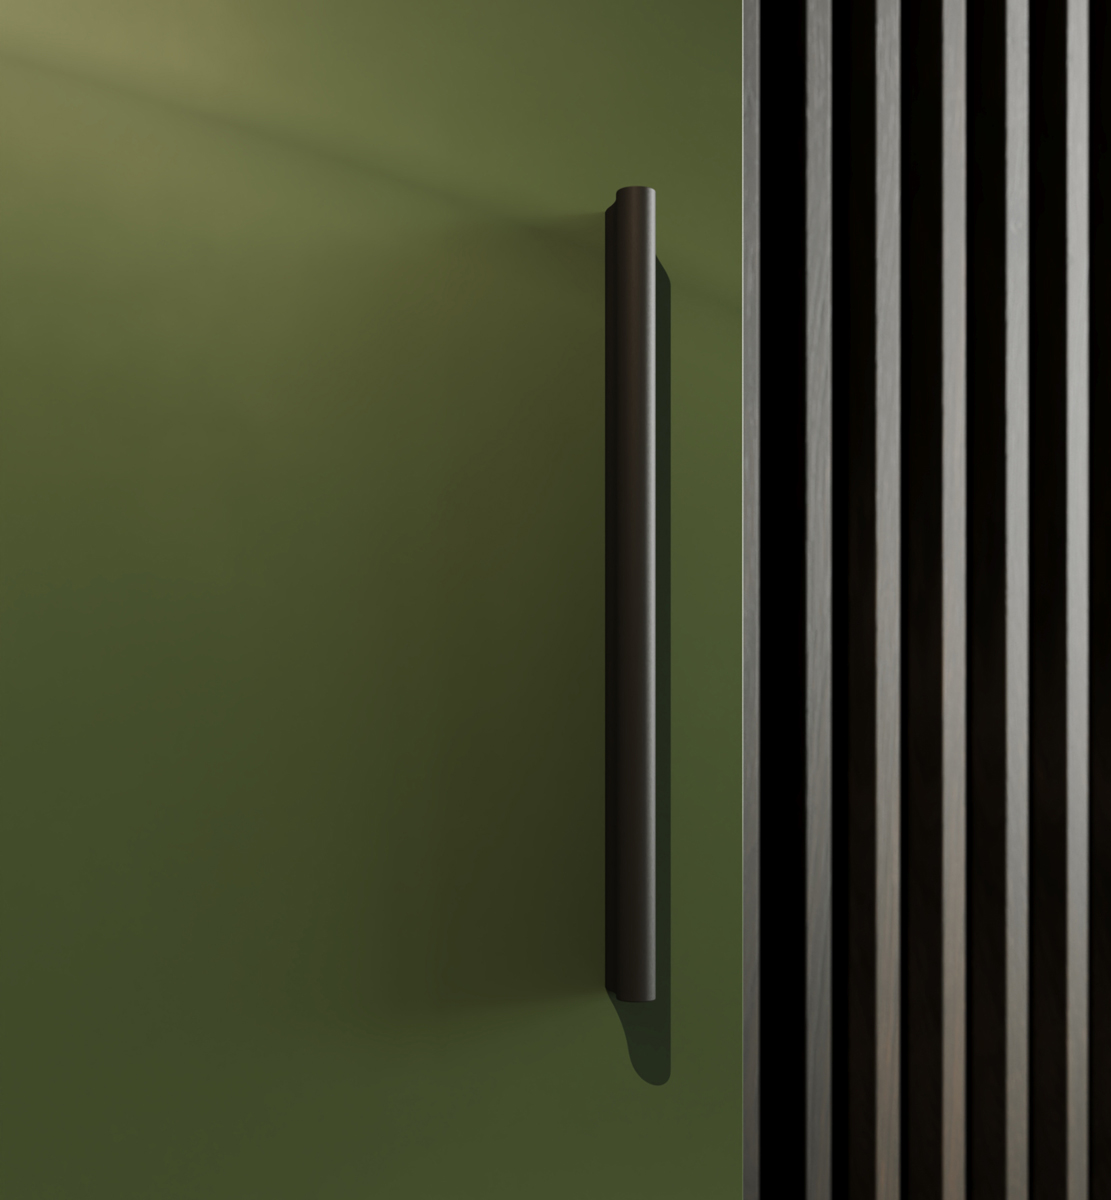 Simple and elegant glass doors from the HANÁK collection.